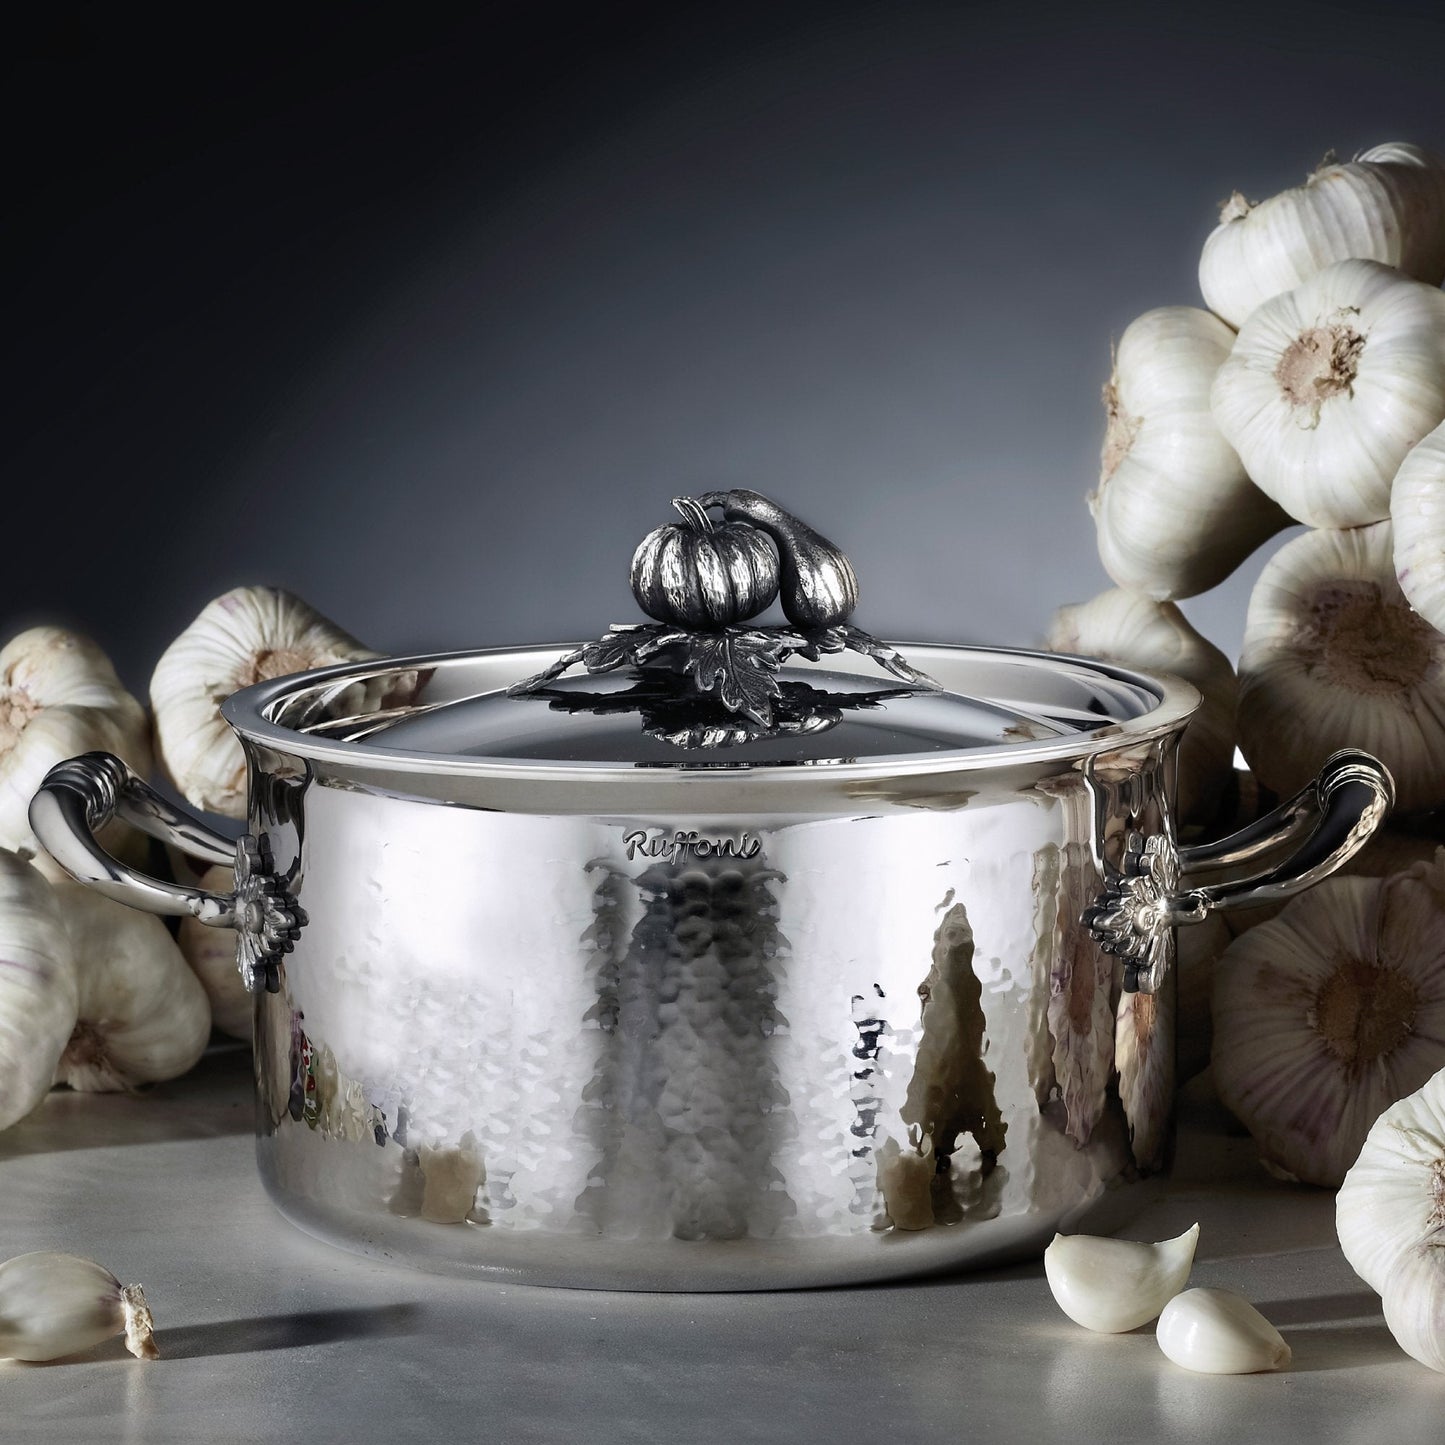 Opus Prima hammered clad stainless steel soup pot with decorated silver-plated lid knob finial from Ruffoni on a garlic background